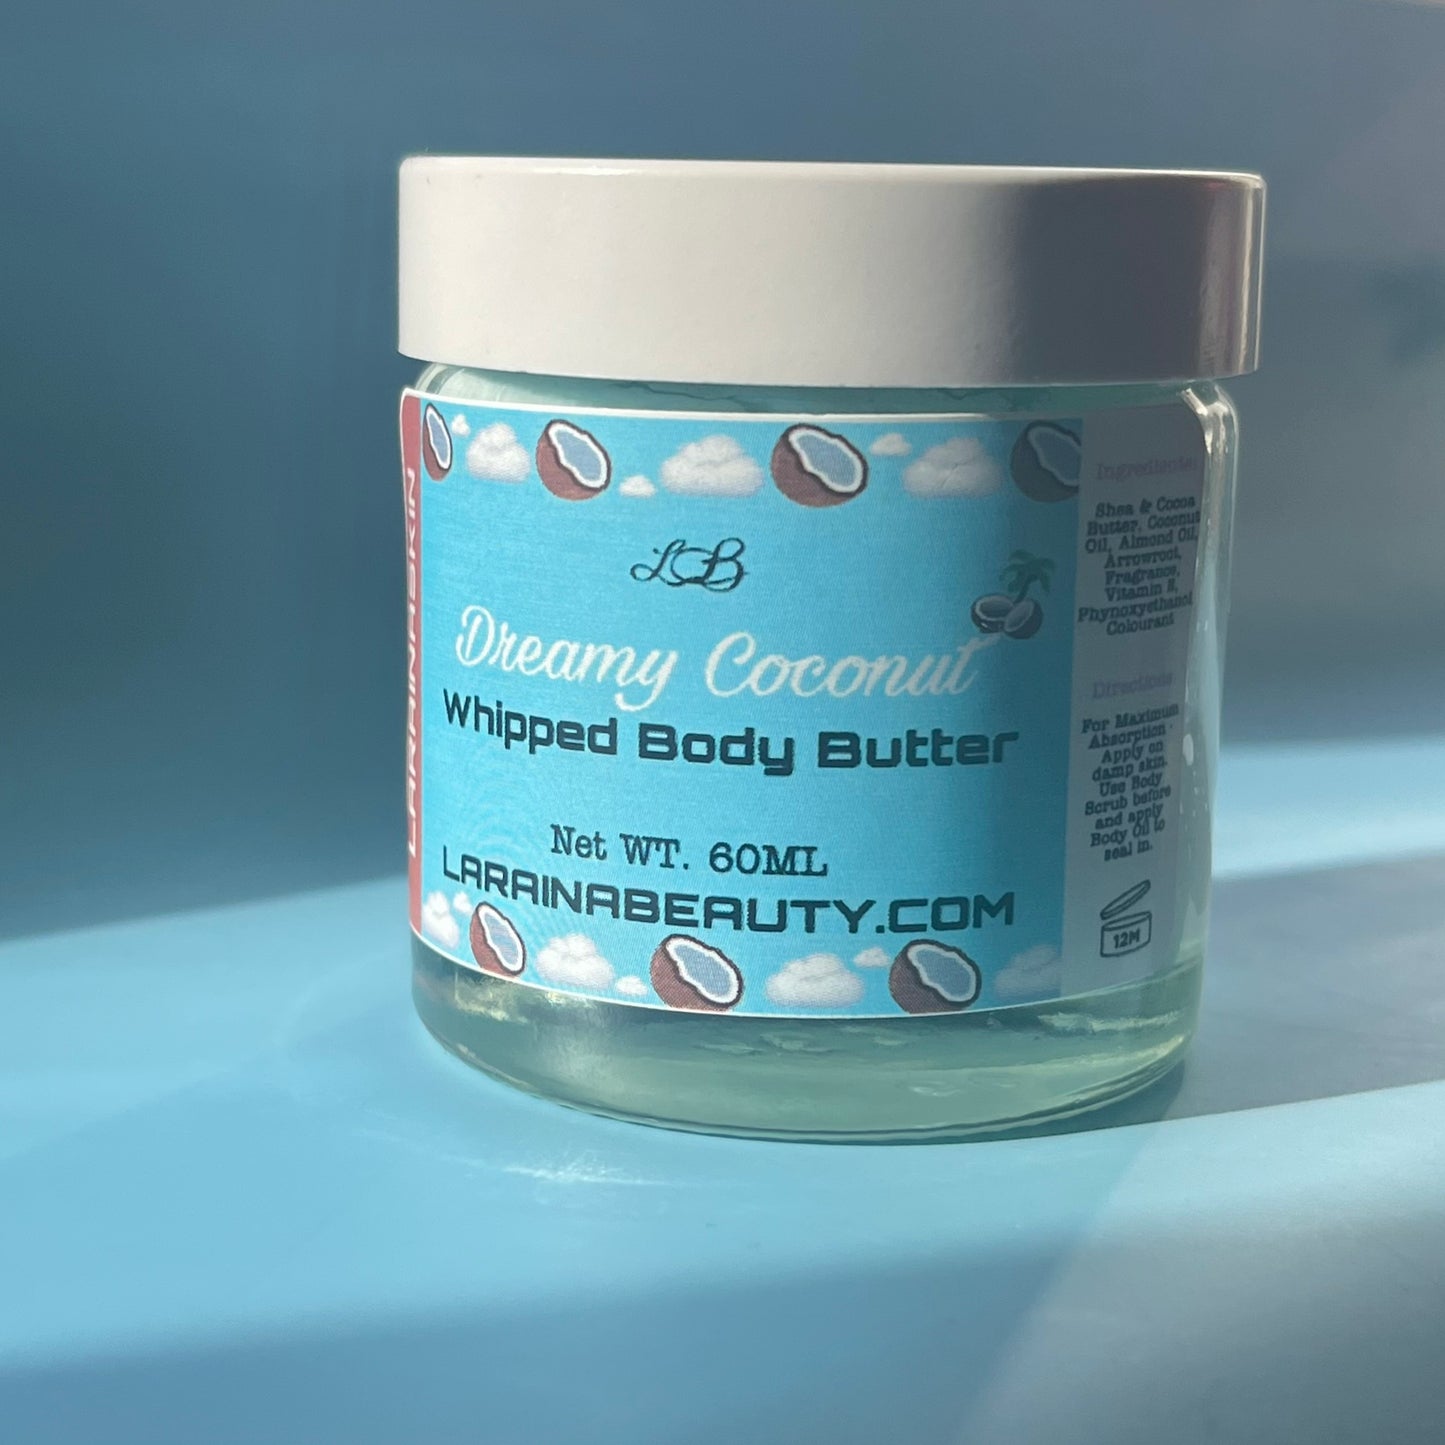 Dreamy coconut is a soft tropical sweet and nutty body butter cream with the most and best moisturising benefits to dry skin. the best uk body cream that leaves the skin glowing, packed with vitamin e, 99% natural ingredients and alcohol free. 